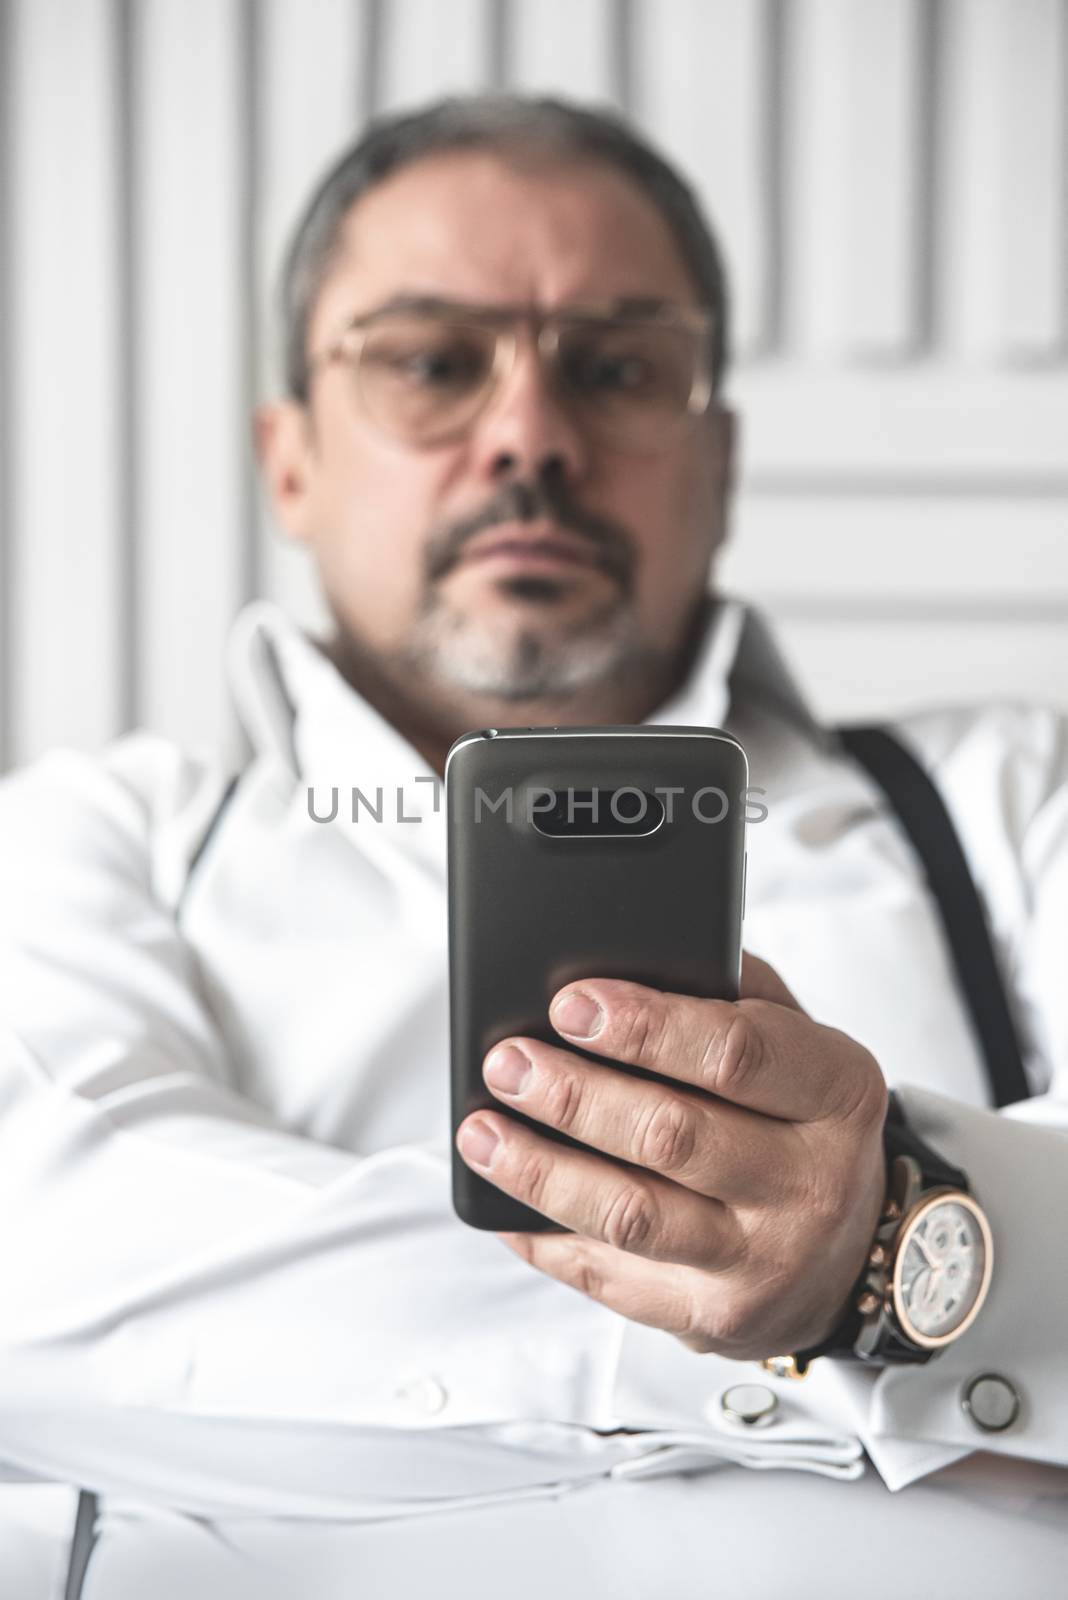 The bad news. A seriously displeased businessman in a white shirt is looking on the phone. foreground focus